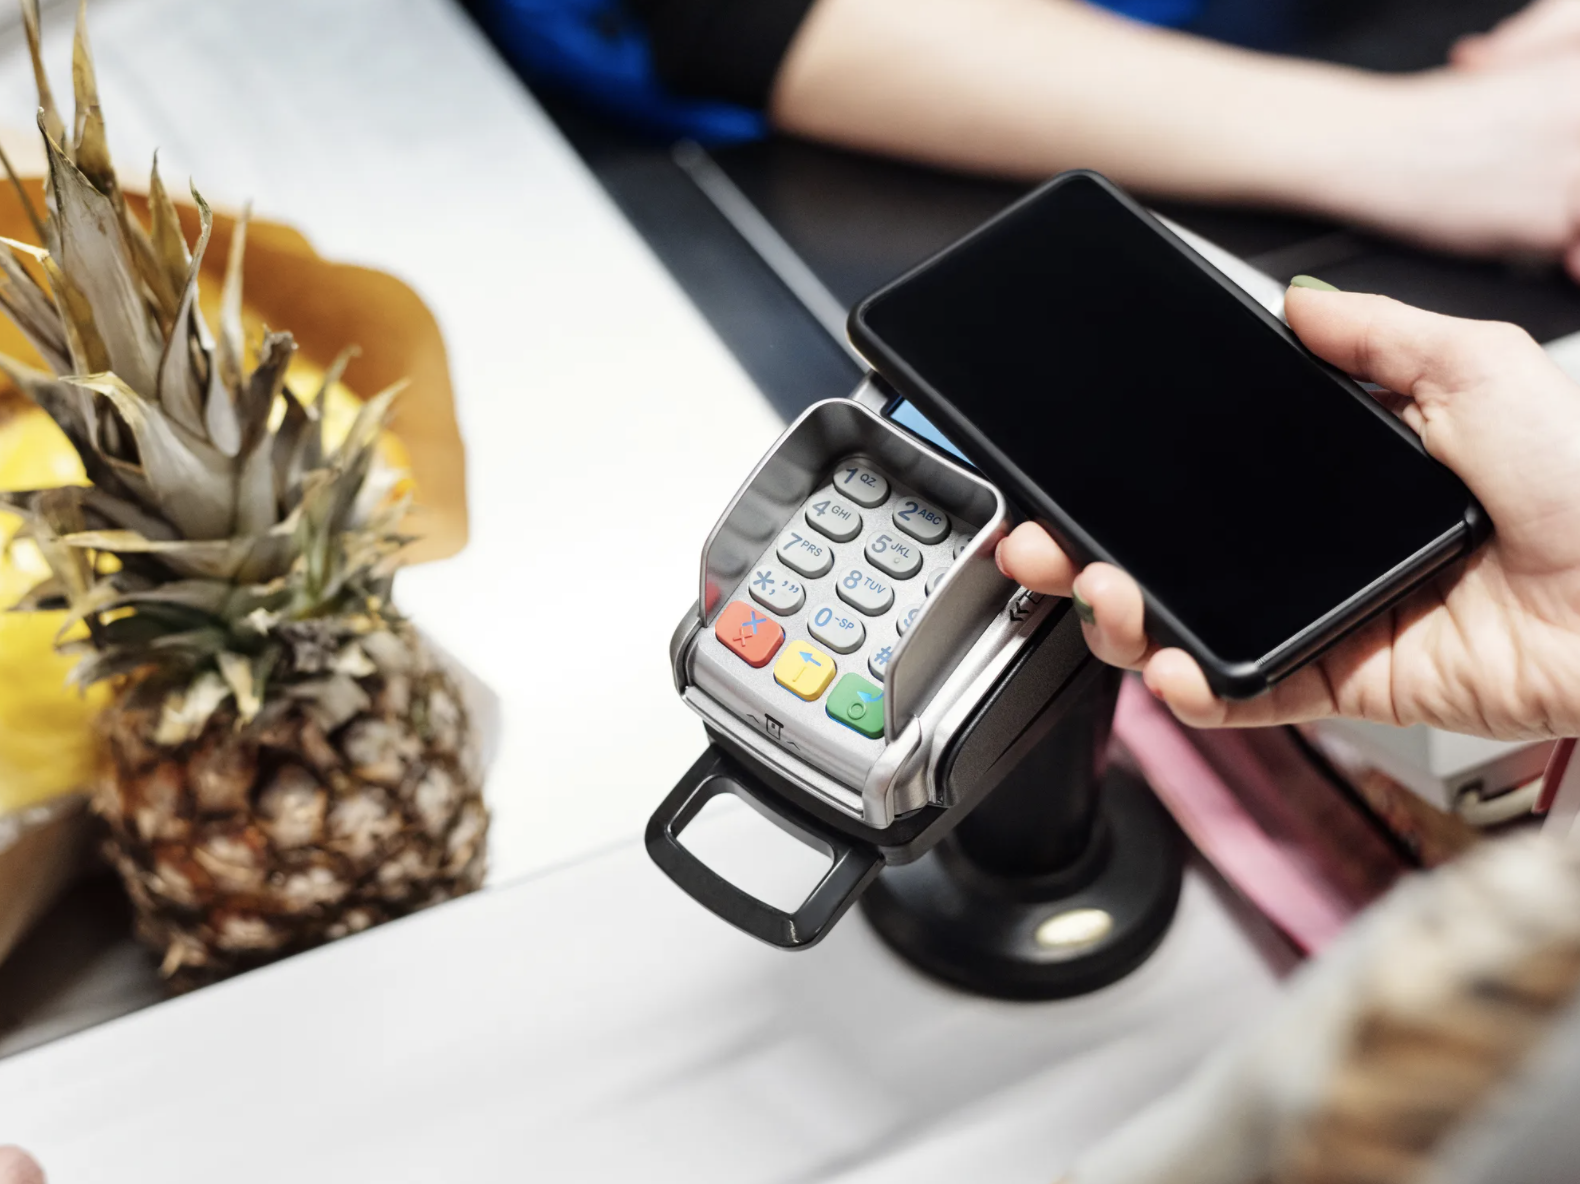 You are currently viewing Visa and JPMorgan Chase Announce Mobile Payments Solutions